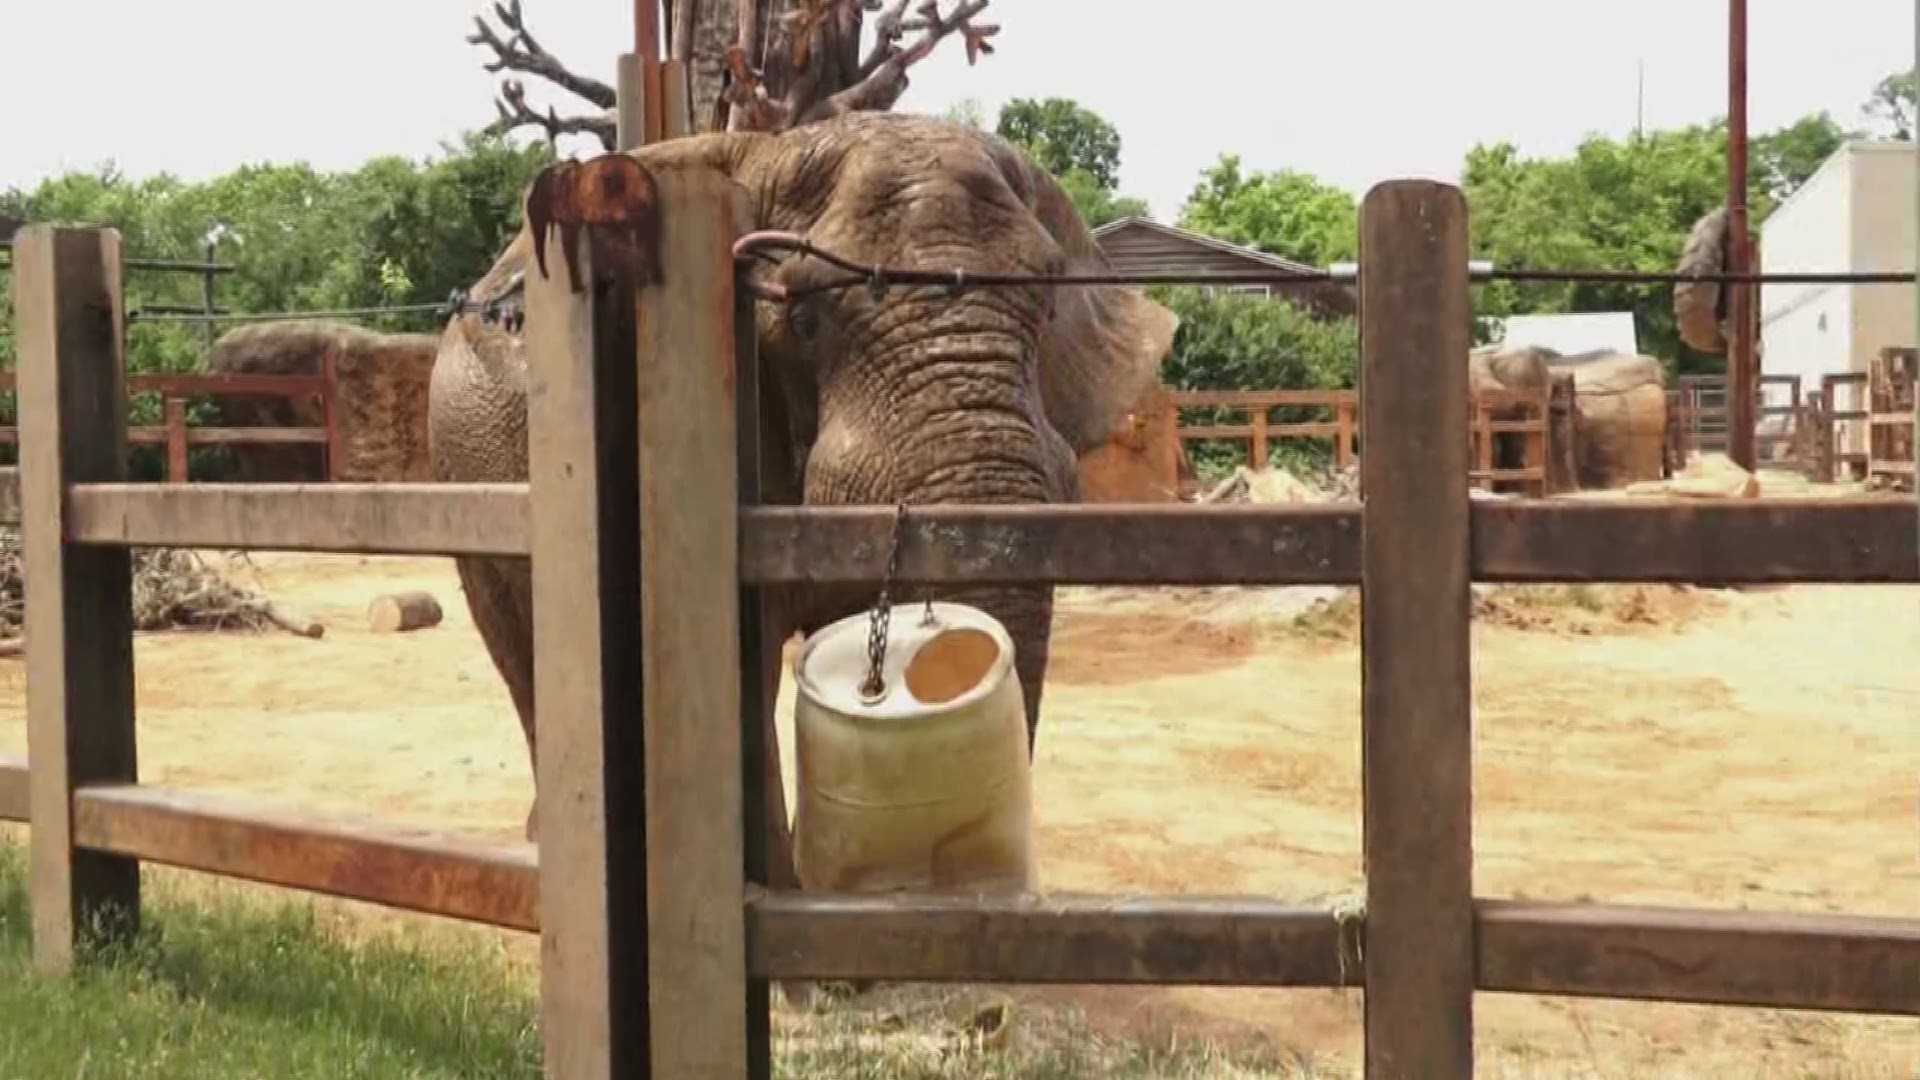 May 17, 2018: Forget peanuts. Zoo Knoxville wants to put the fresh-cut trees and branches from your yard on its elephants' menu.